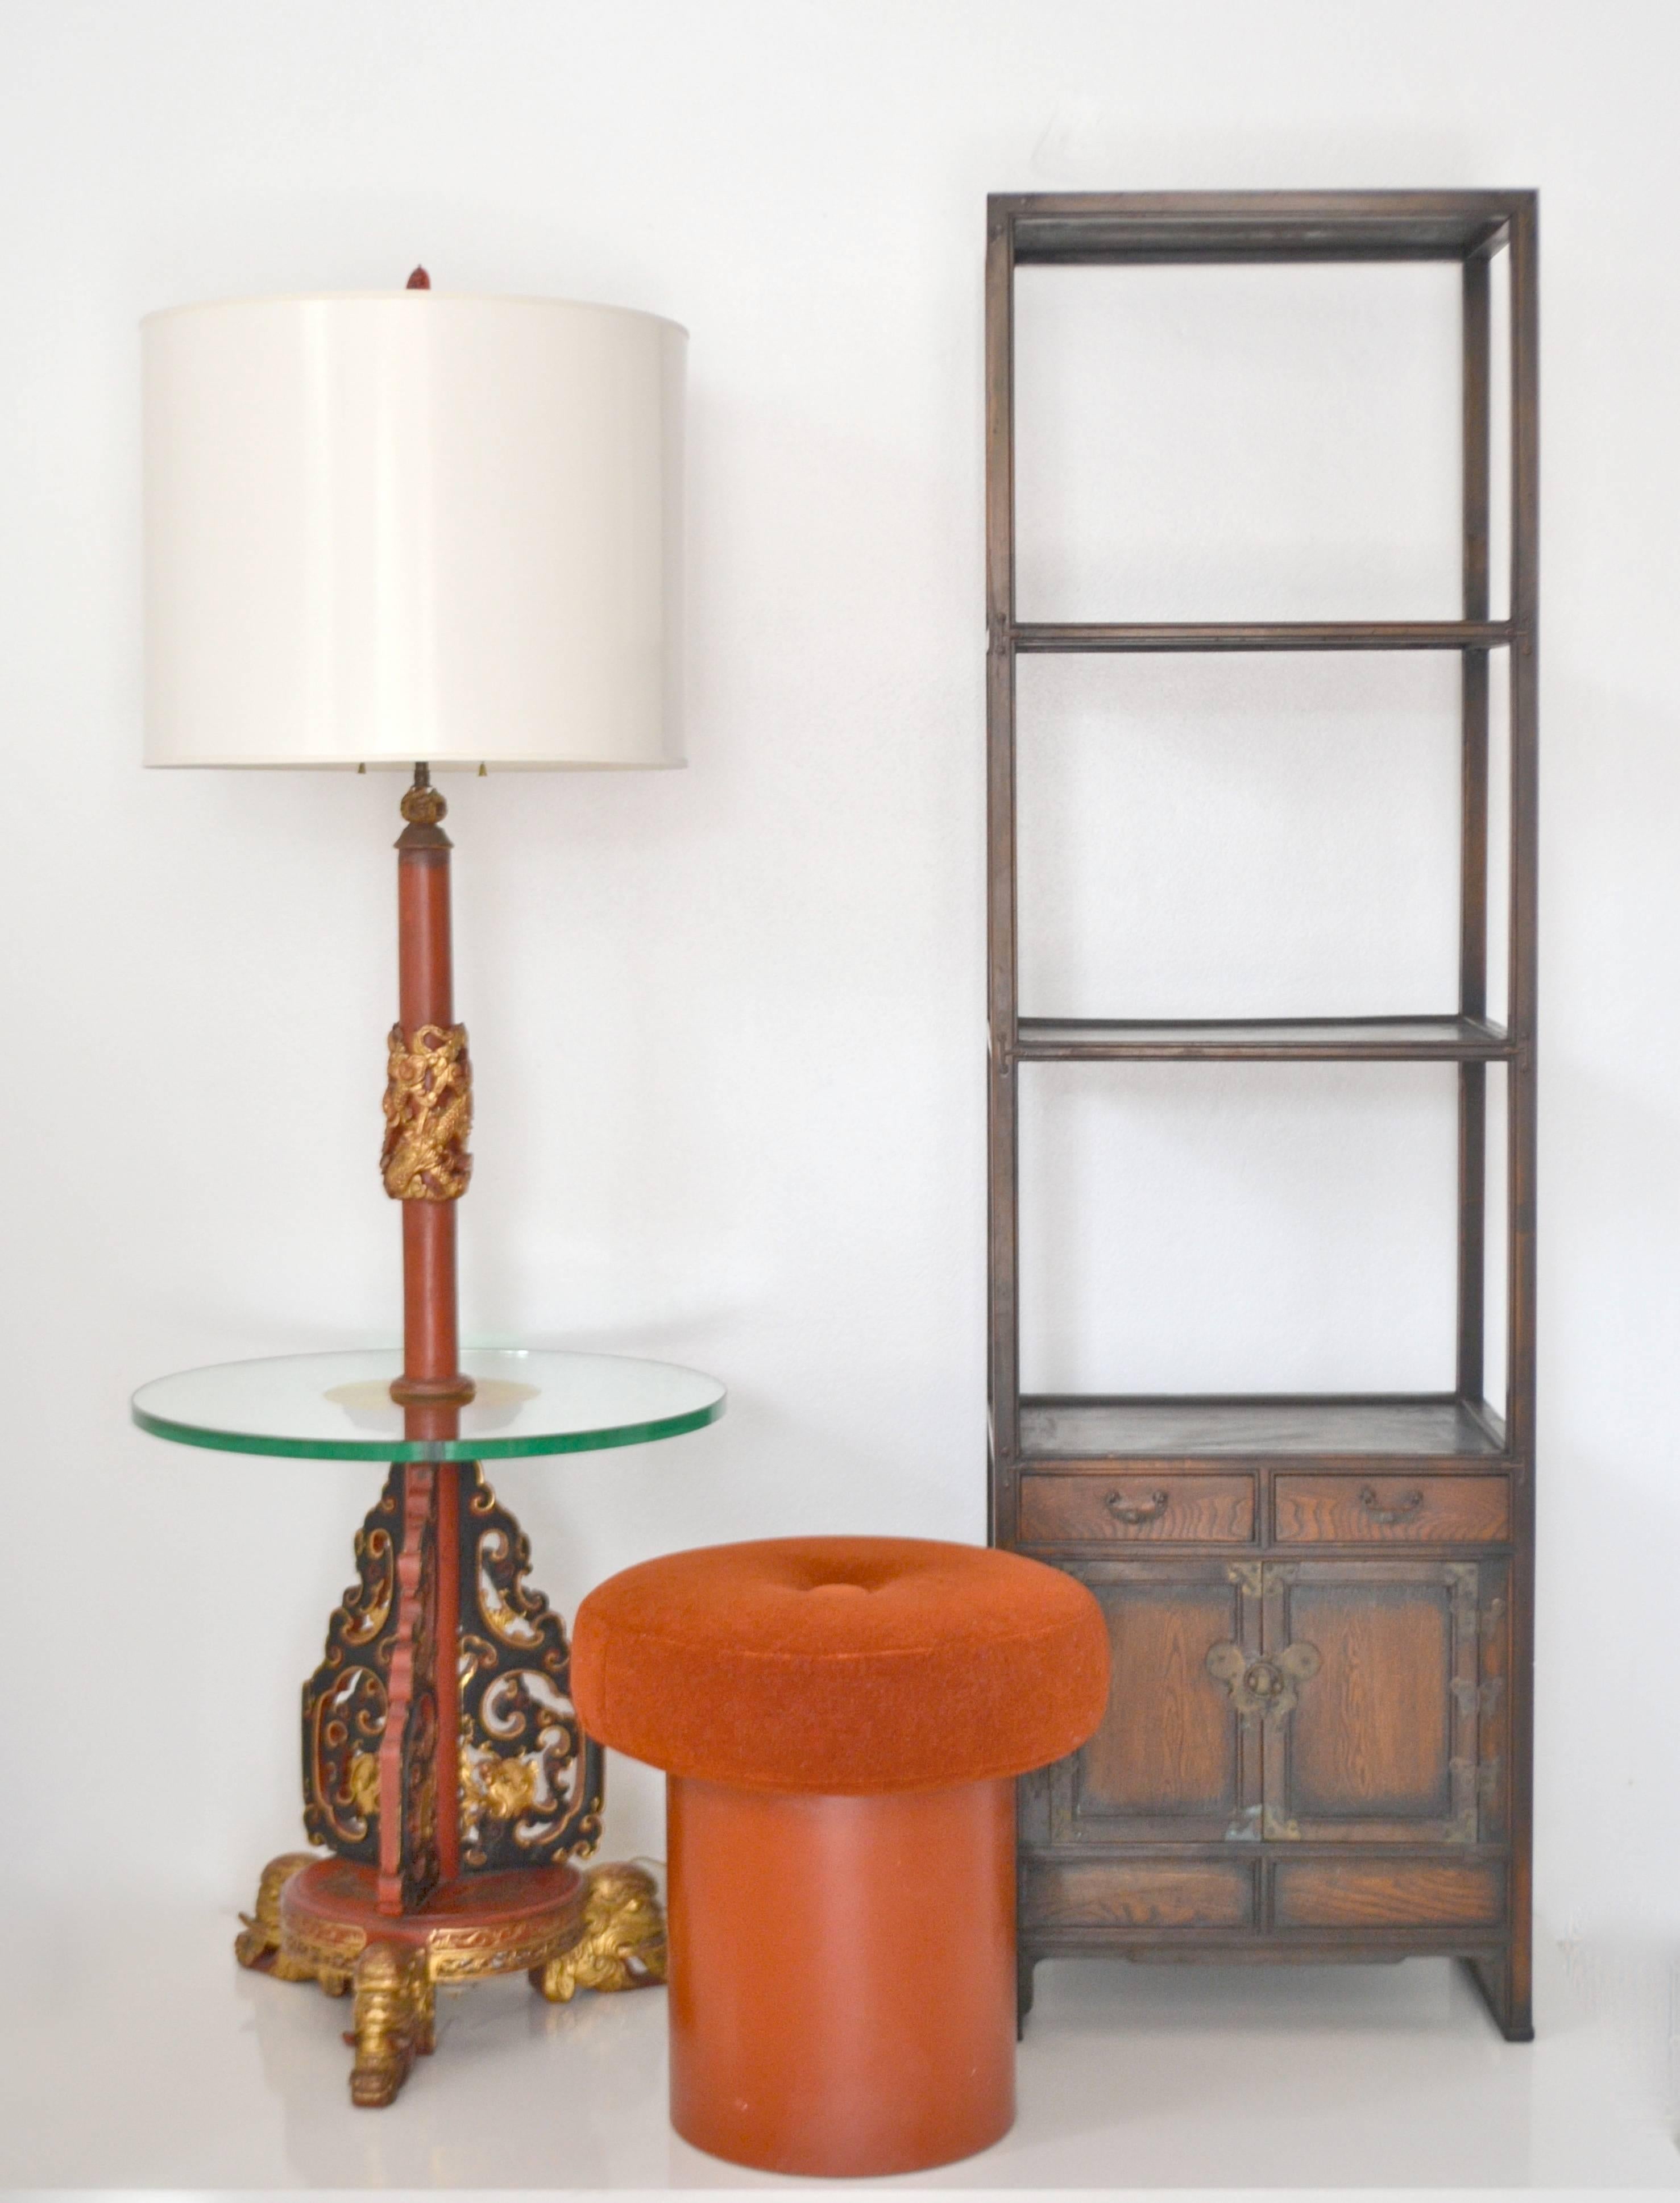 Glamorous Hollywood Regency Asian floor lamp, circa 1940s-1950s. This striking standing lamp is exquisitely artisan crafted of carved wood in a japanned red and black finish with giltwood accents. The lamp is designed with a thick 3/4